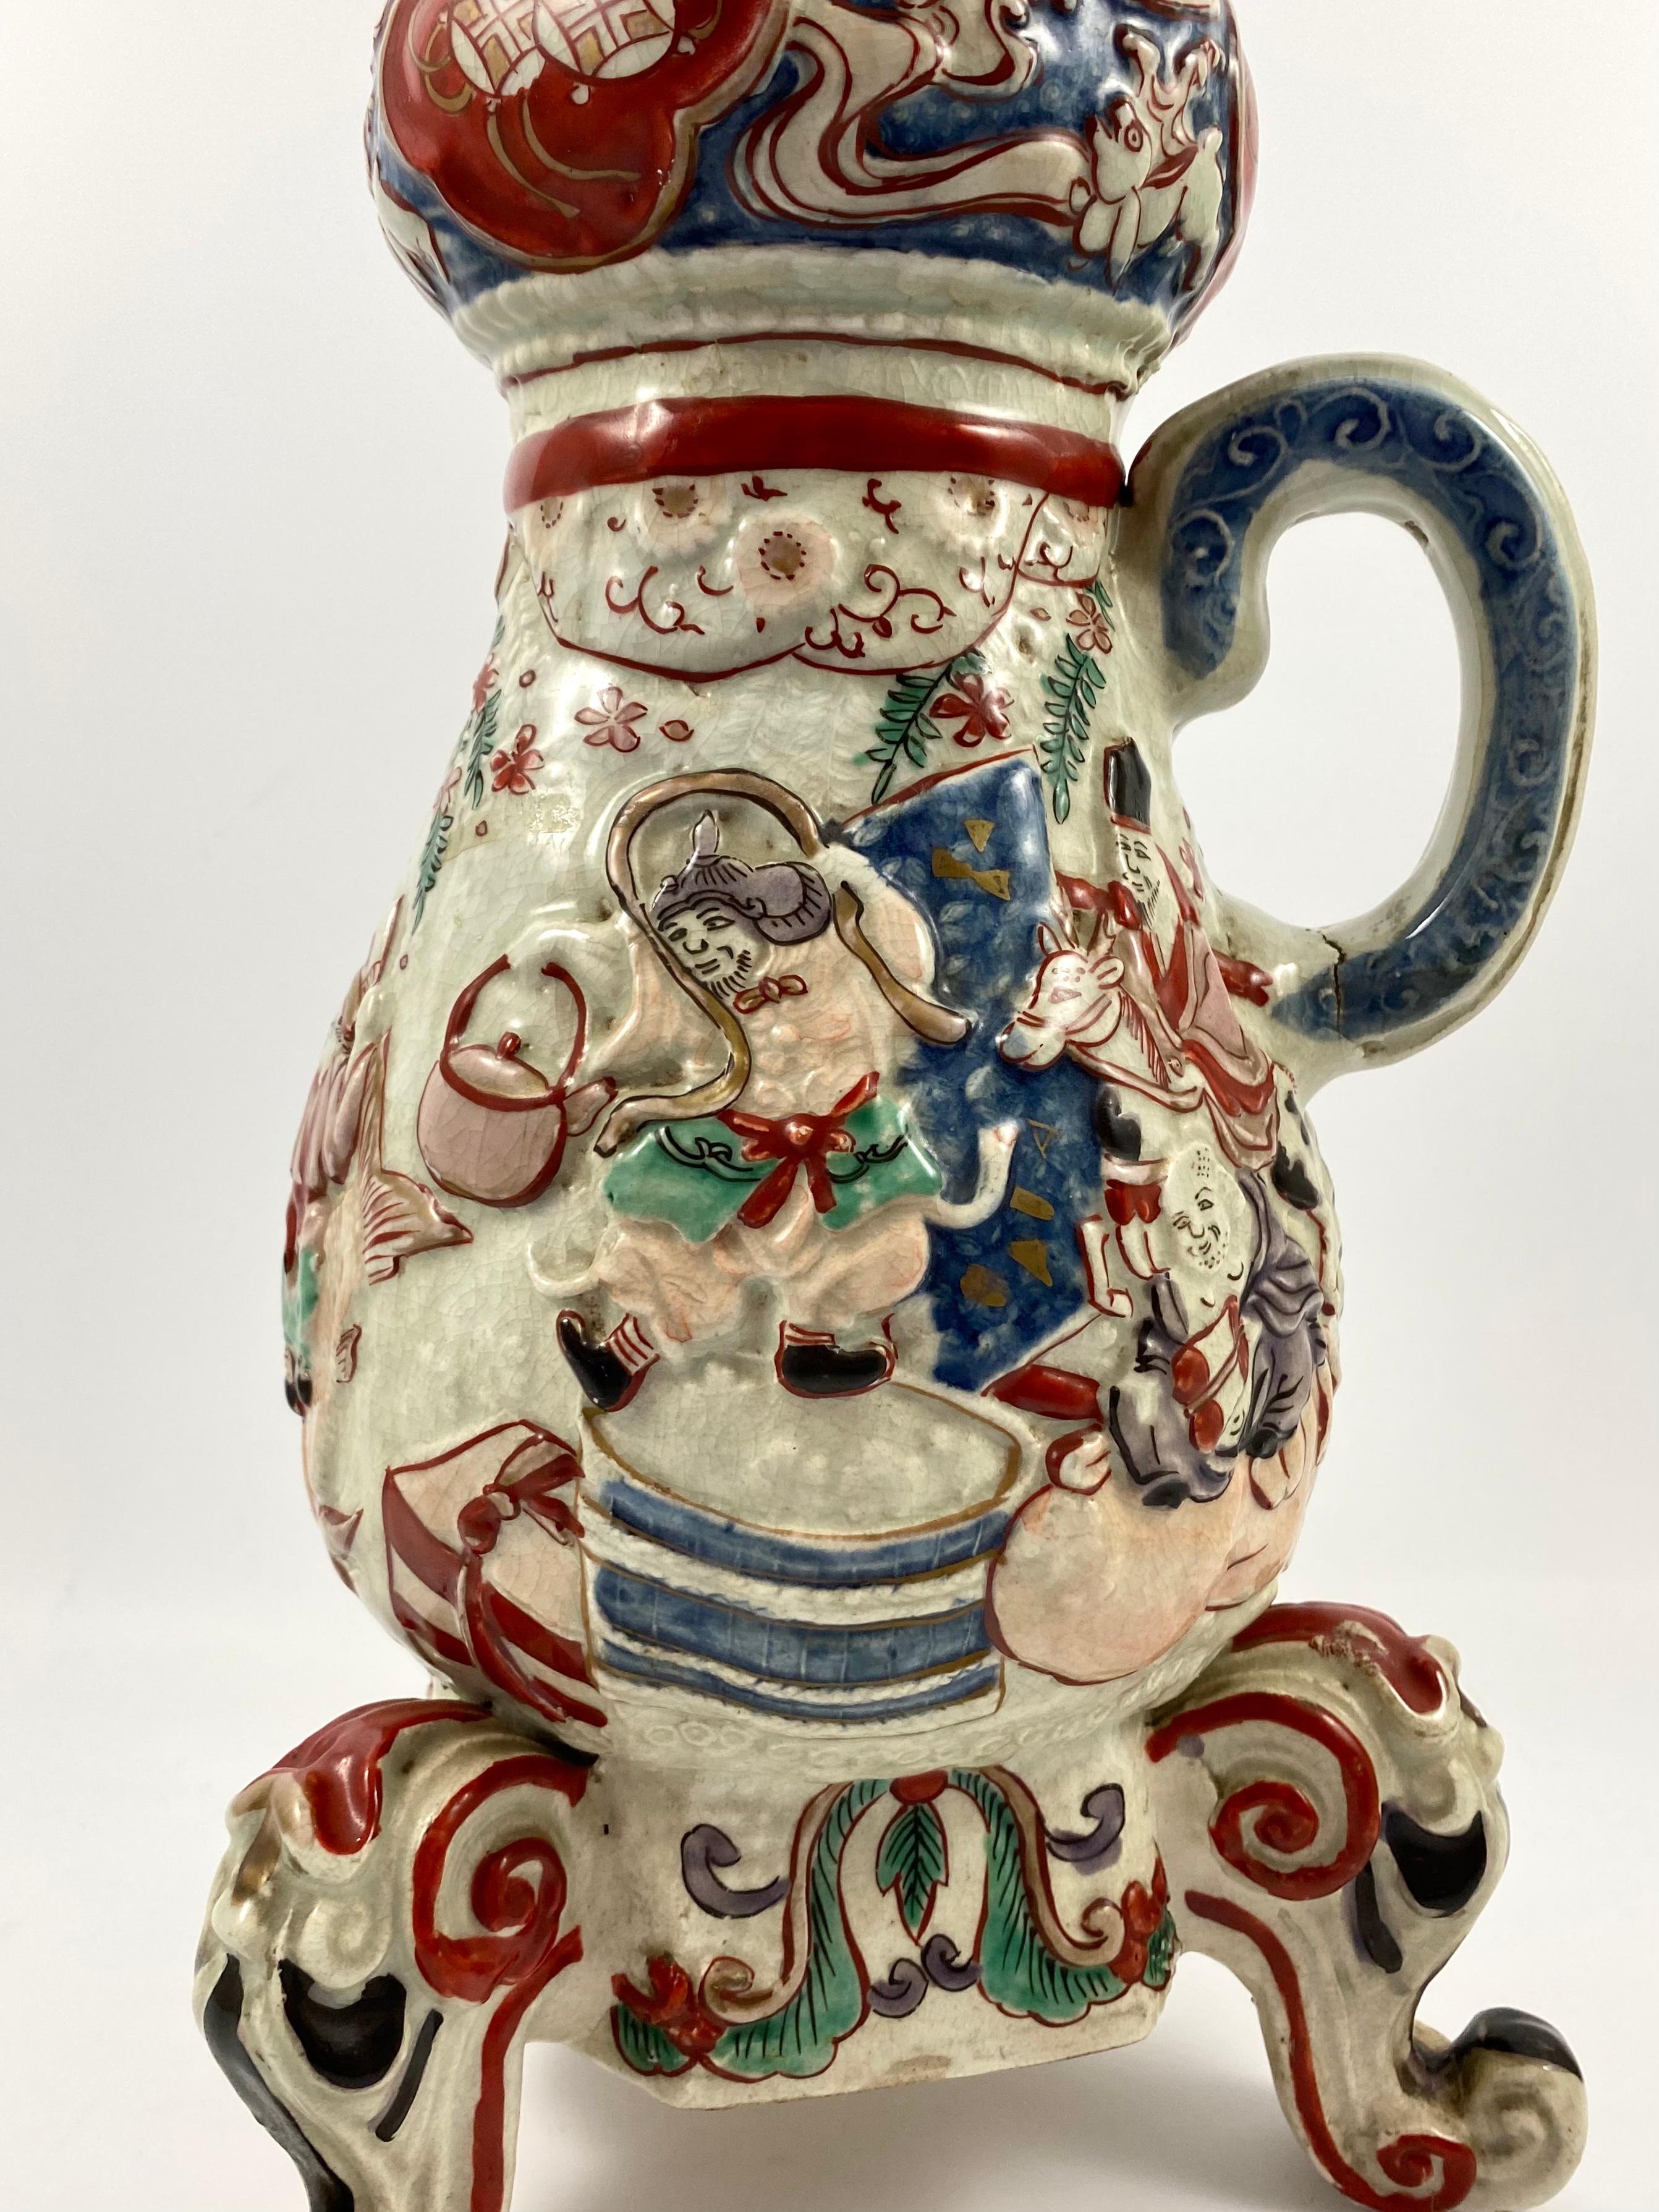 Imari porcelain coffee pot, Arita, Japan, late 17th century, Edo Period. The baluster shaped coffee pot moulded with a continuous scene of Daikoku, Ebisu and Hotei drinking sake, along with various attendants, beneath trees, and a tasselled swag.